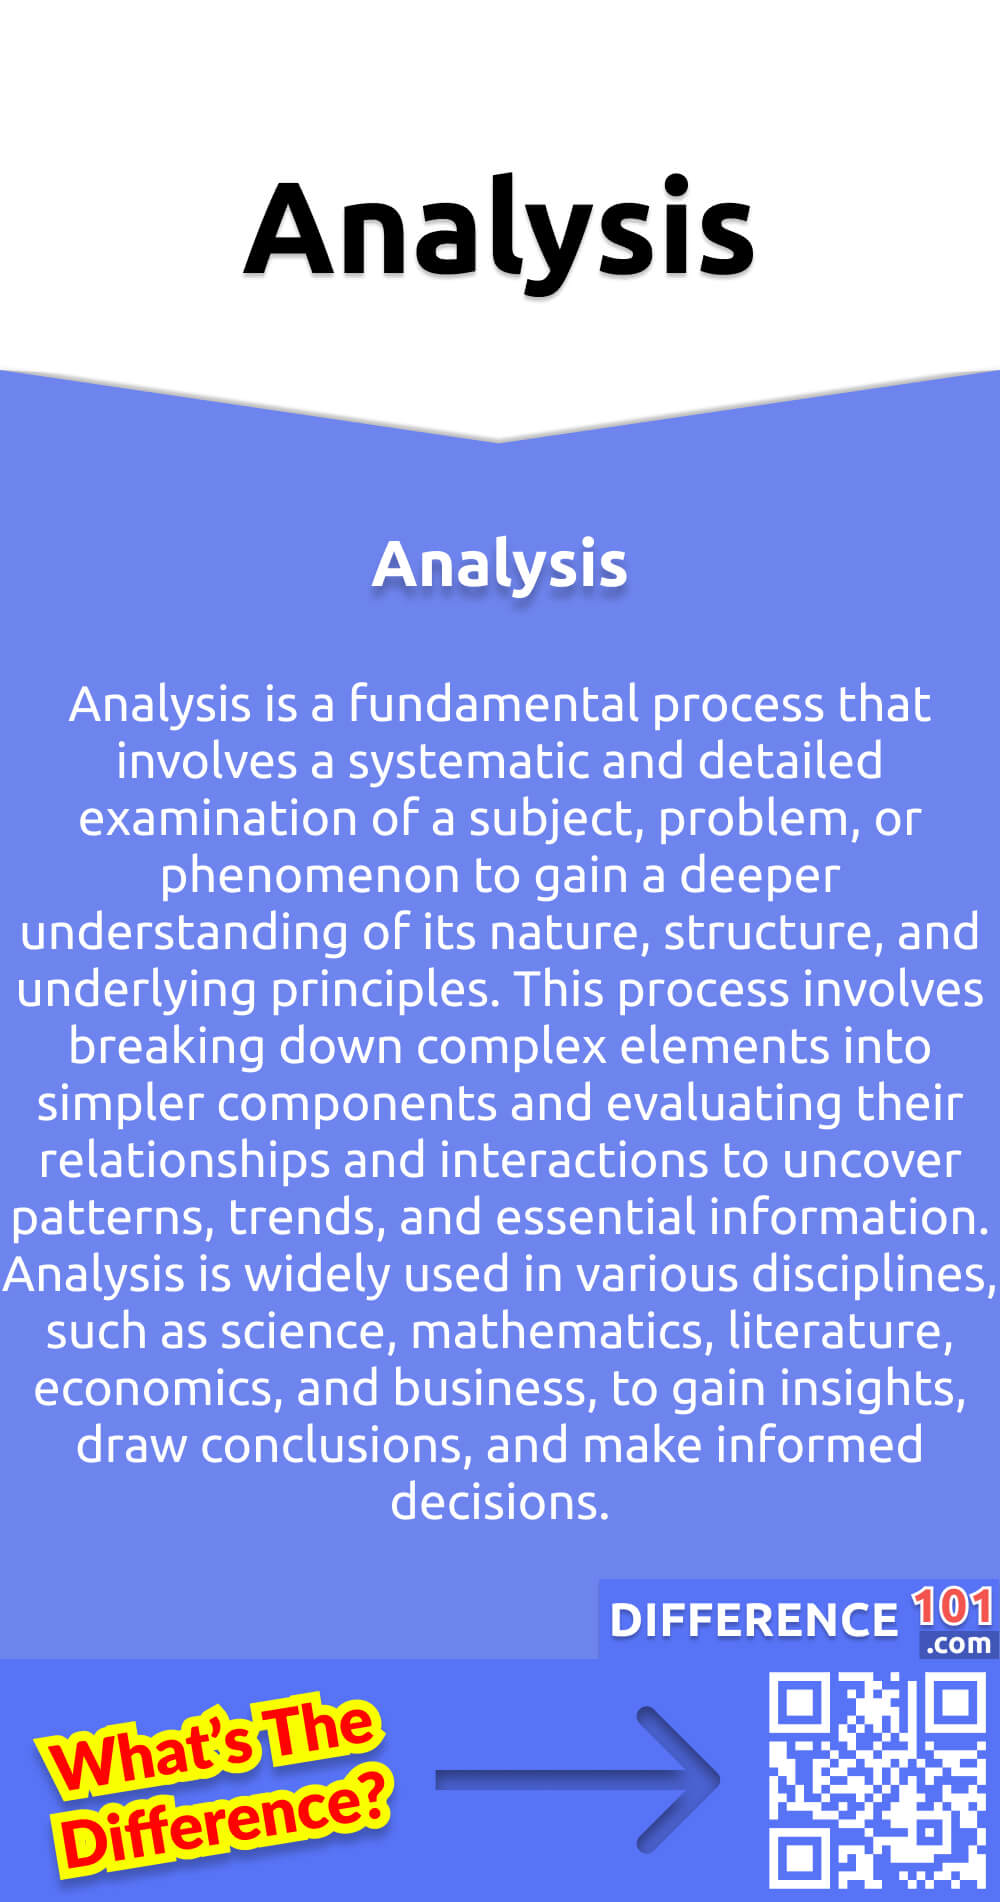 What Is Analysis? Analysis is a fundamental process that involves a systematic and detailed examination of a subject, problem, or phenomenon to gain a deeper understanding of its nature, structure, and underlying principles. This process involves breaking down complex elements into simpler components and evaluating their relationships and interactions to uncover patterns, trends, and essential information. Analysis is widely used in various disciplines, such as science, mathematics, literature, economics, and business, to gain insights, draw conclusions, and make informed decisions. It is a crucial tool for researchers and professionals to make sense of complex information and data, allowing them to uncover hidden insights, identify problems, and develop effective solutions. Overall, analysis is a critical process that plays a vital role in enhancing our understanding of the world around us.